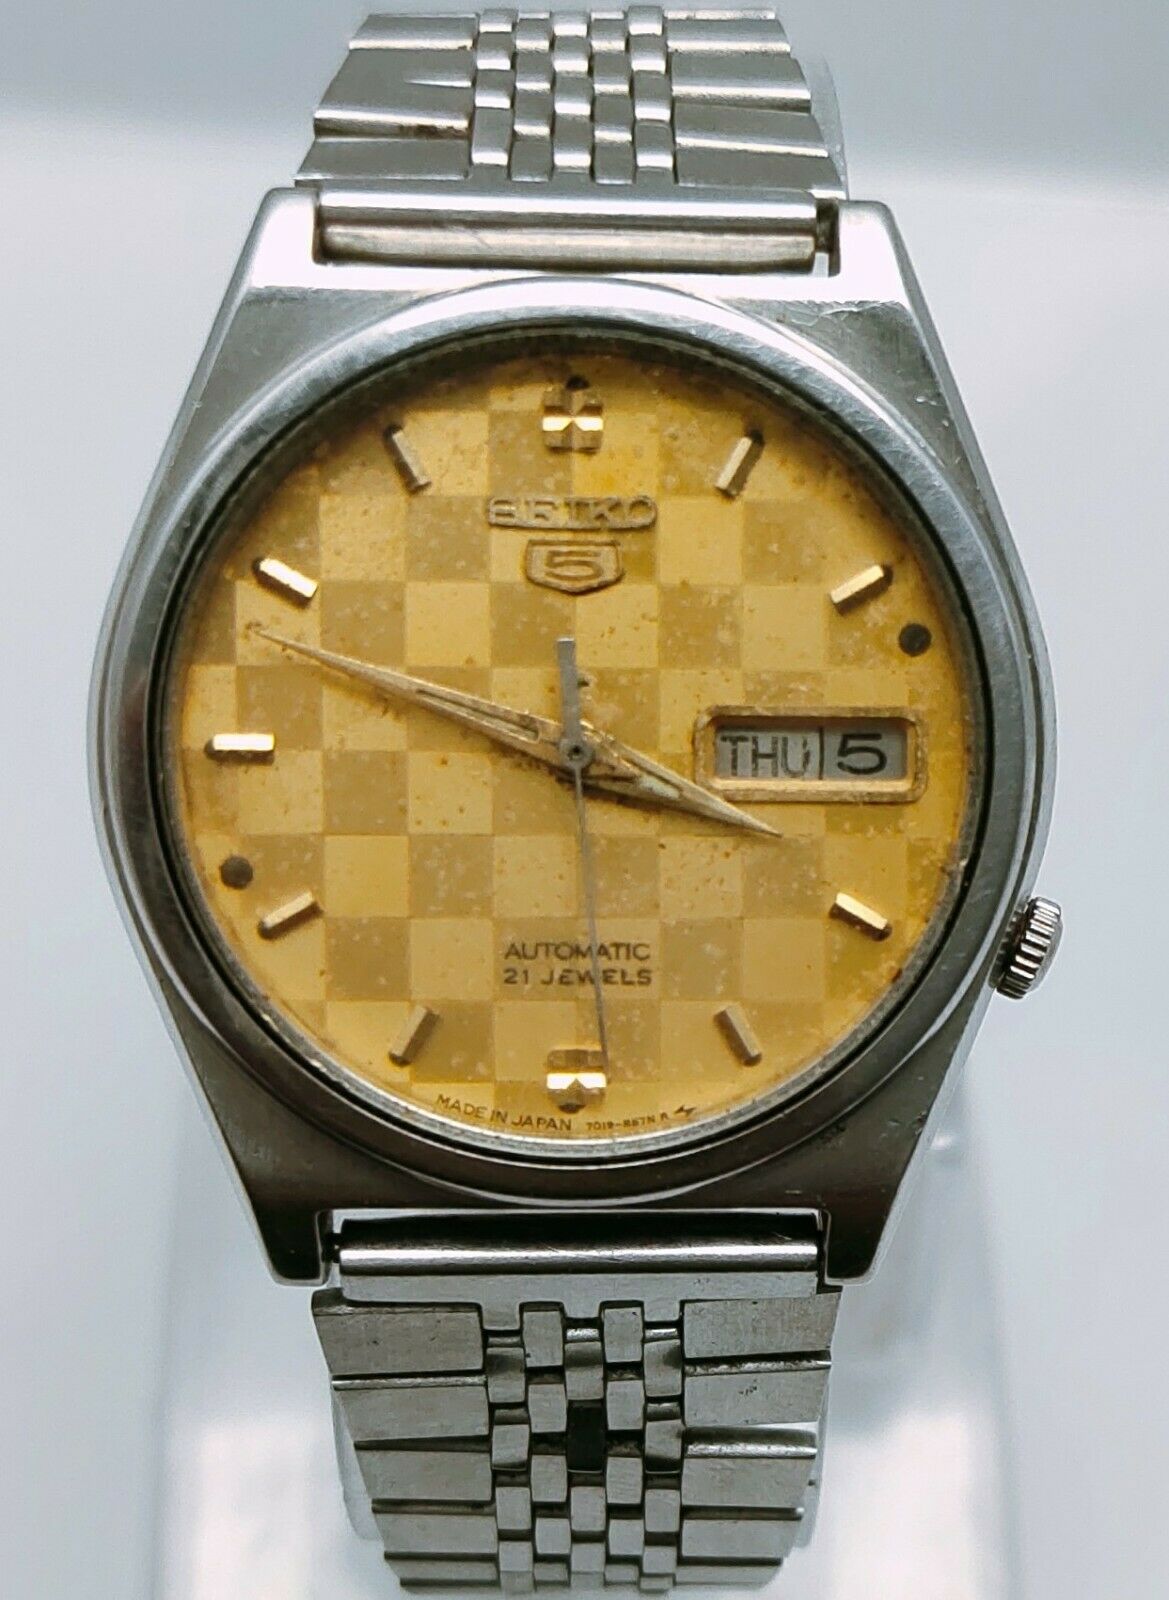 VINTAGE SEIKO 5 AUTOMATIC 7019-8180 G JAPAN DAY/DATE